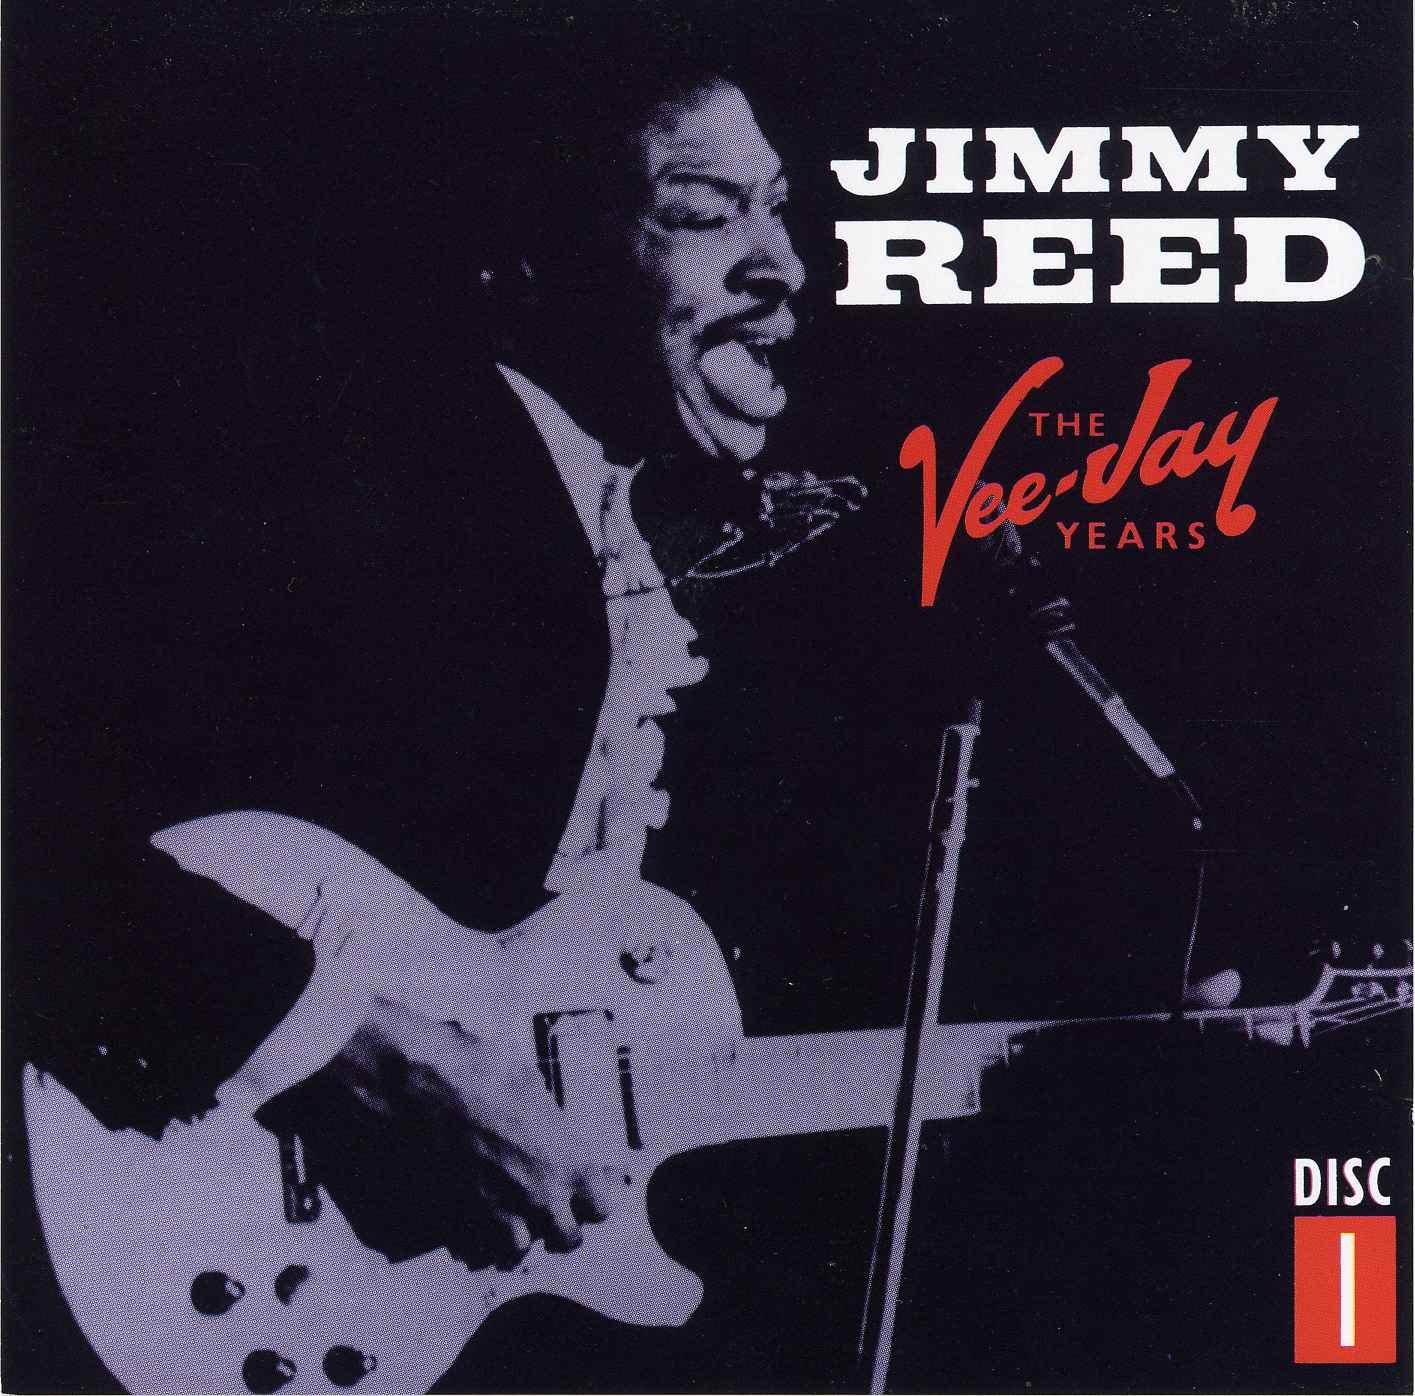 Рид текст. Jimmy Reed "Rockin' with Reed". Lil Jimmy Reed. Jimmy Smith обложки альбомов.